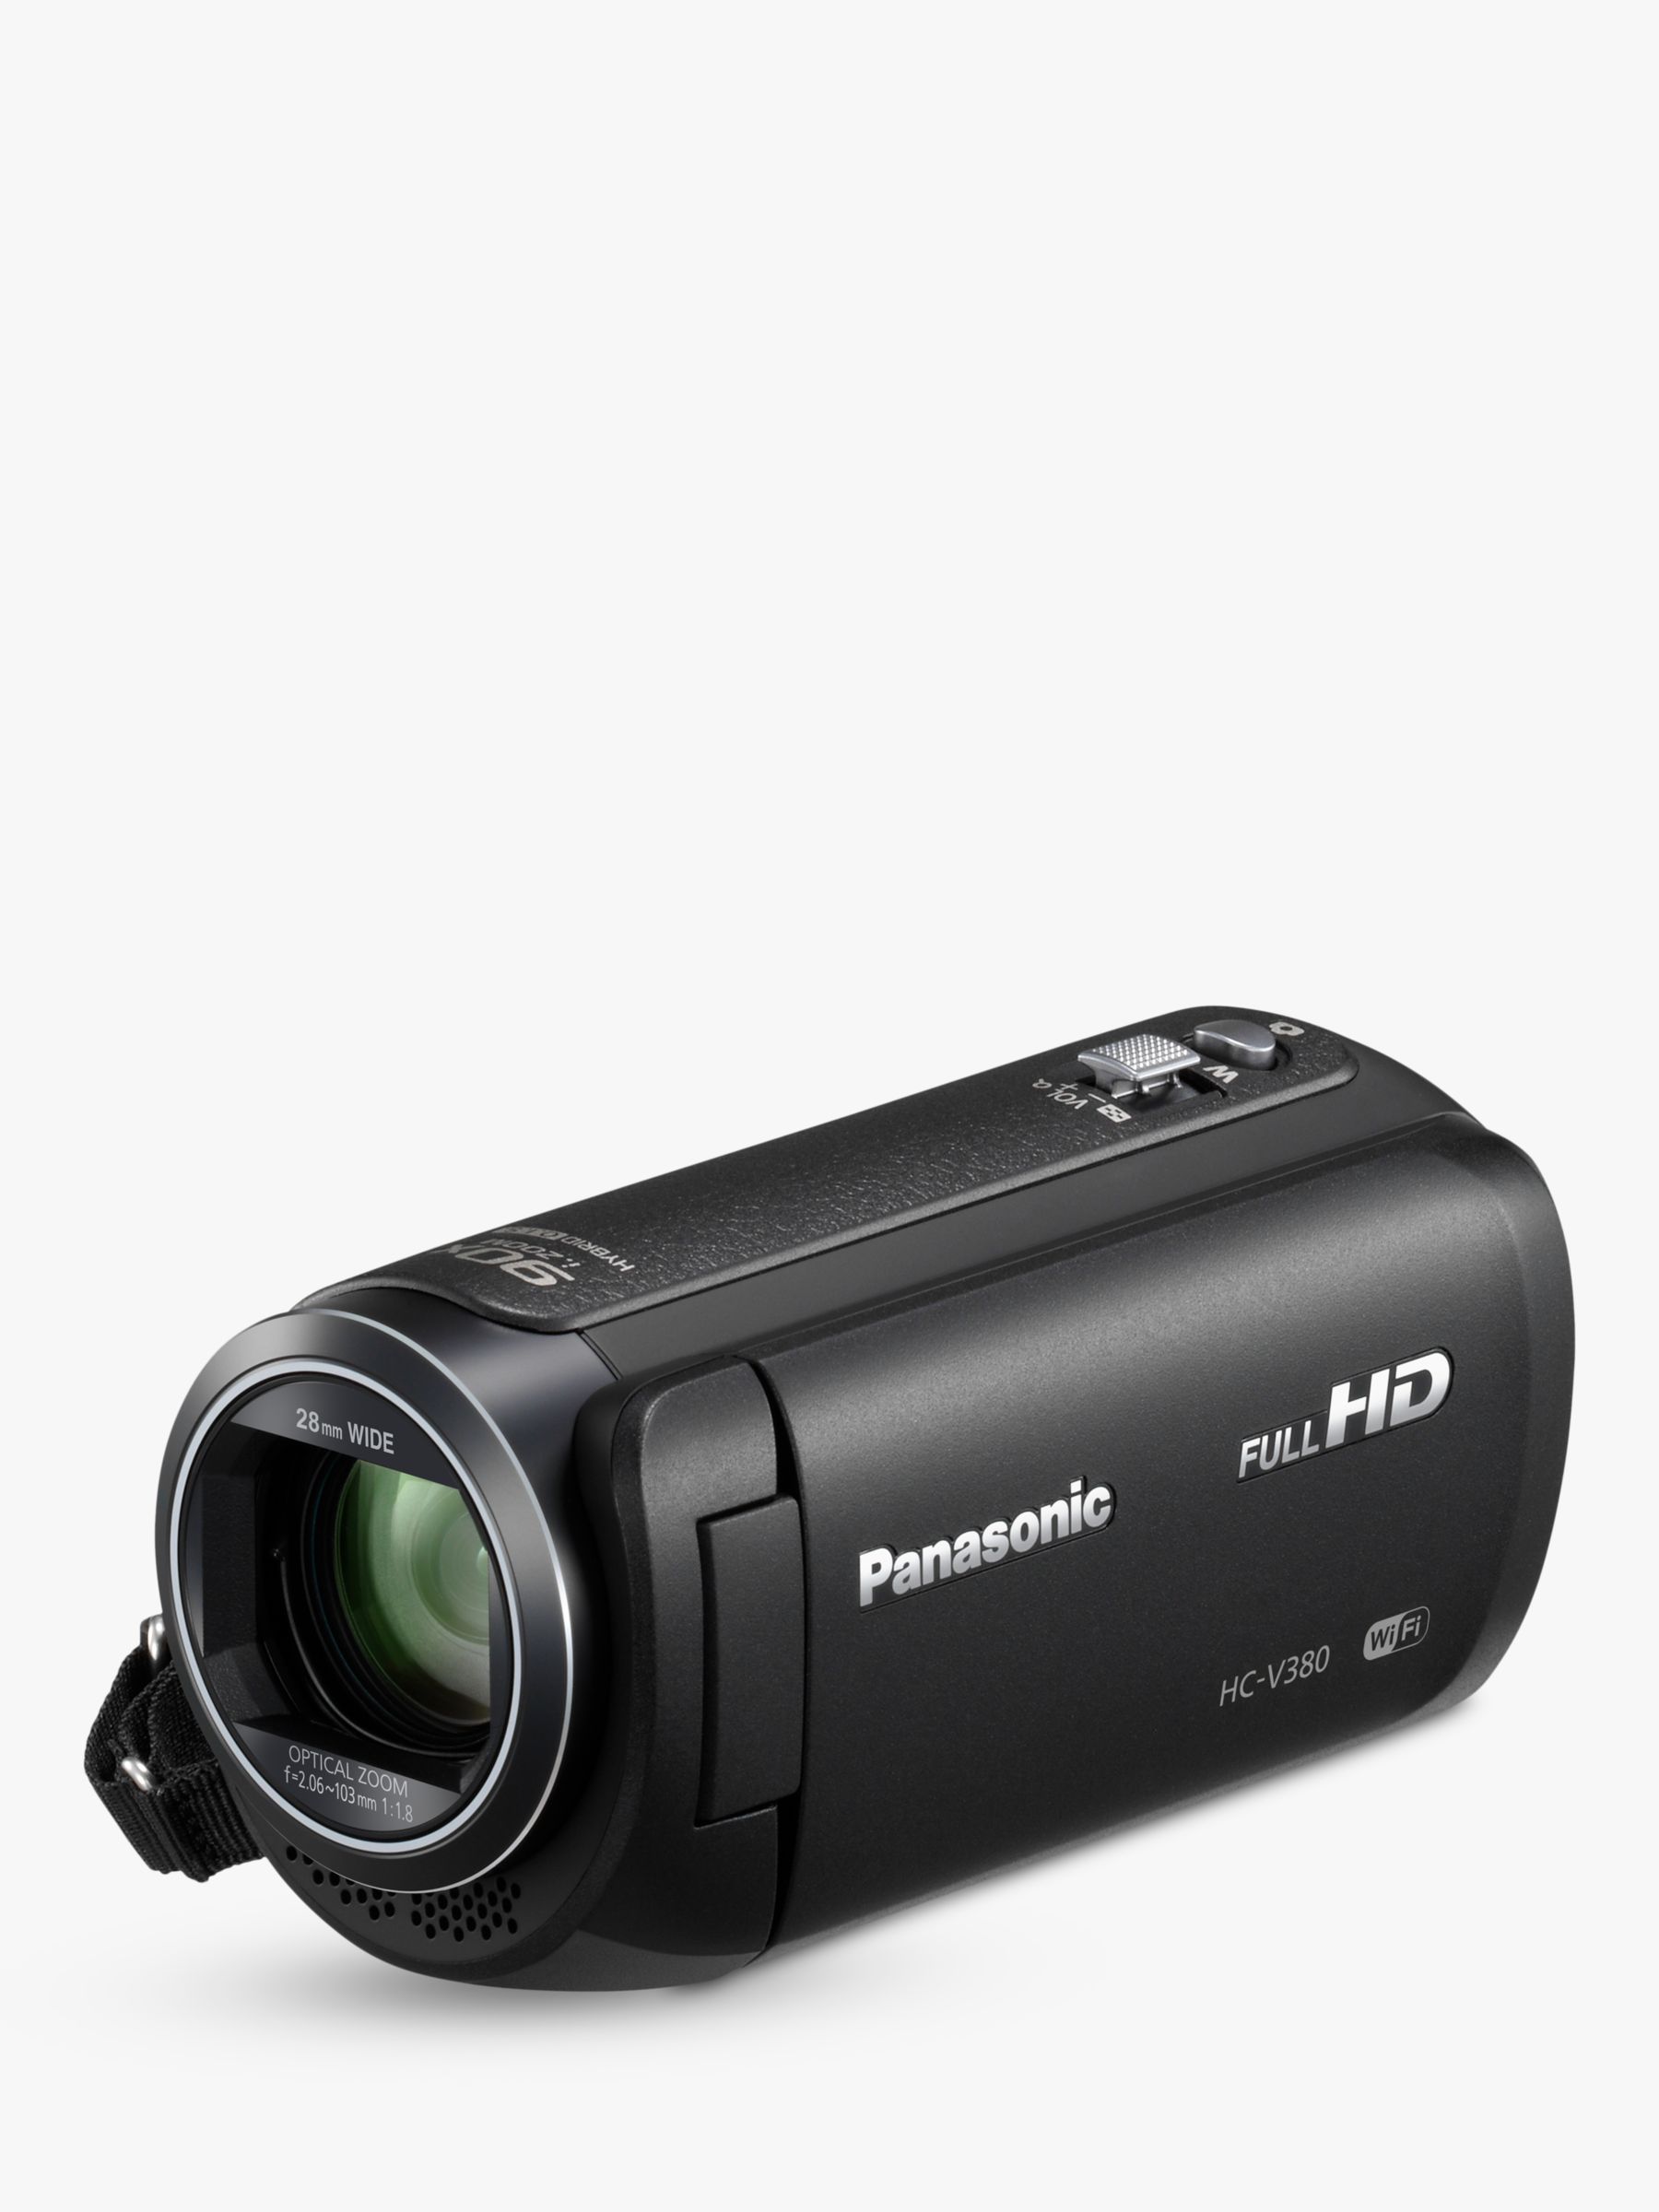 Panasonic HC-V380EB Camcorder, Wi-Fi, HD 1080p, 2.5MP Movie/10MP Still, 50x Optical Zoom, 90x Intelligent Zoom, 2.7 Wide LCD Touch Monitor